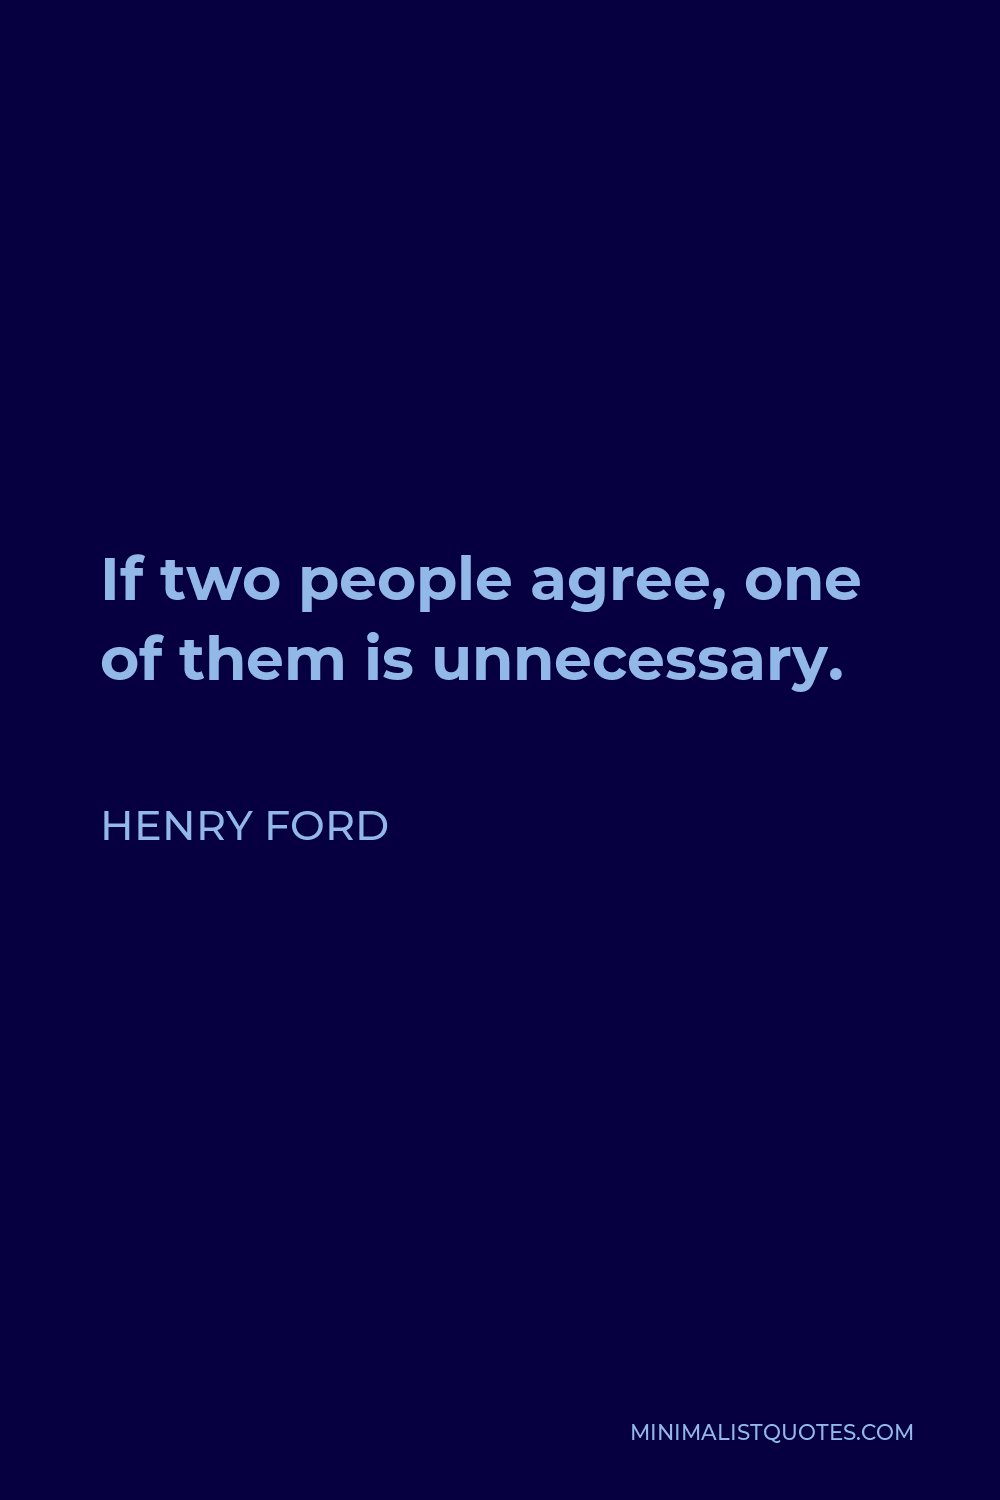 Henry Ford Quote - If two people agree, one of them is unnecessary.